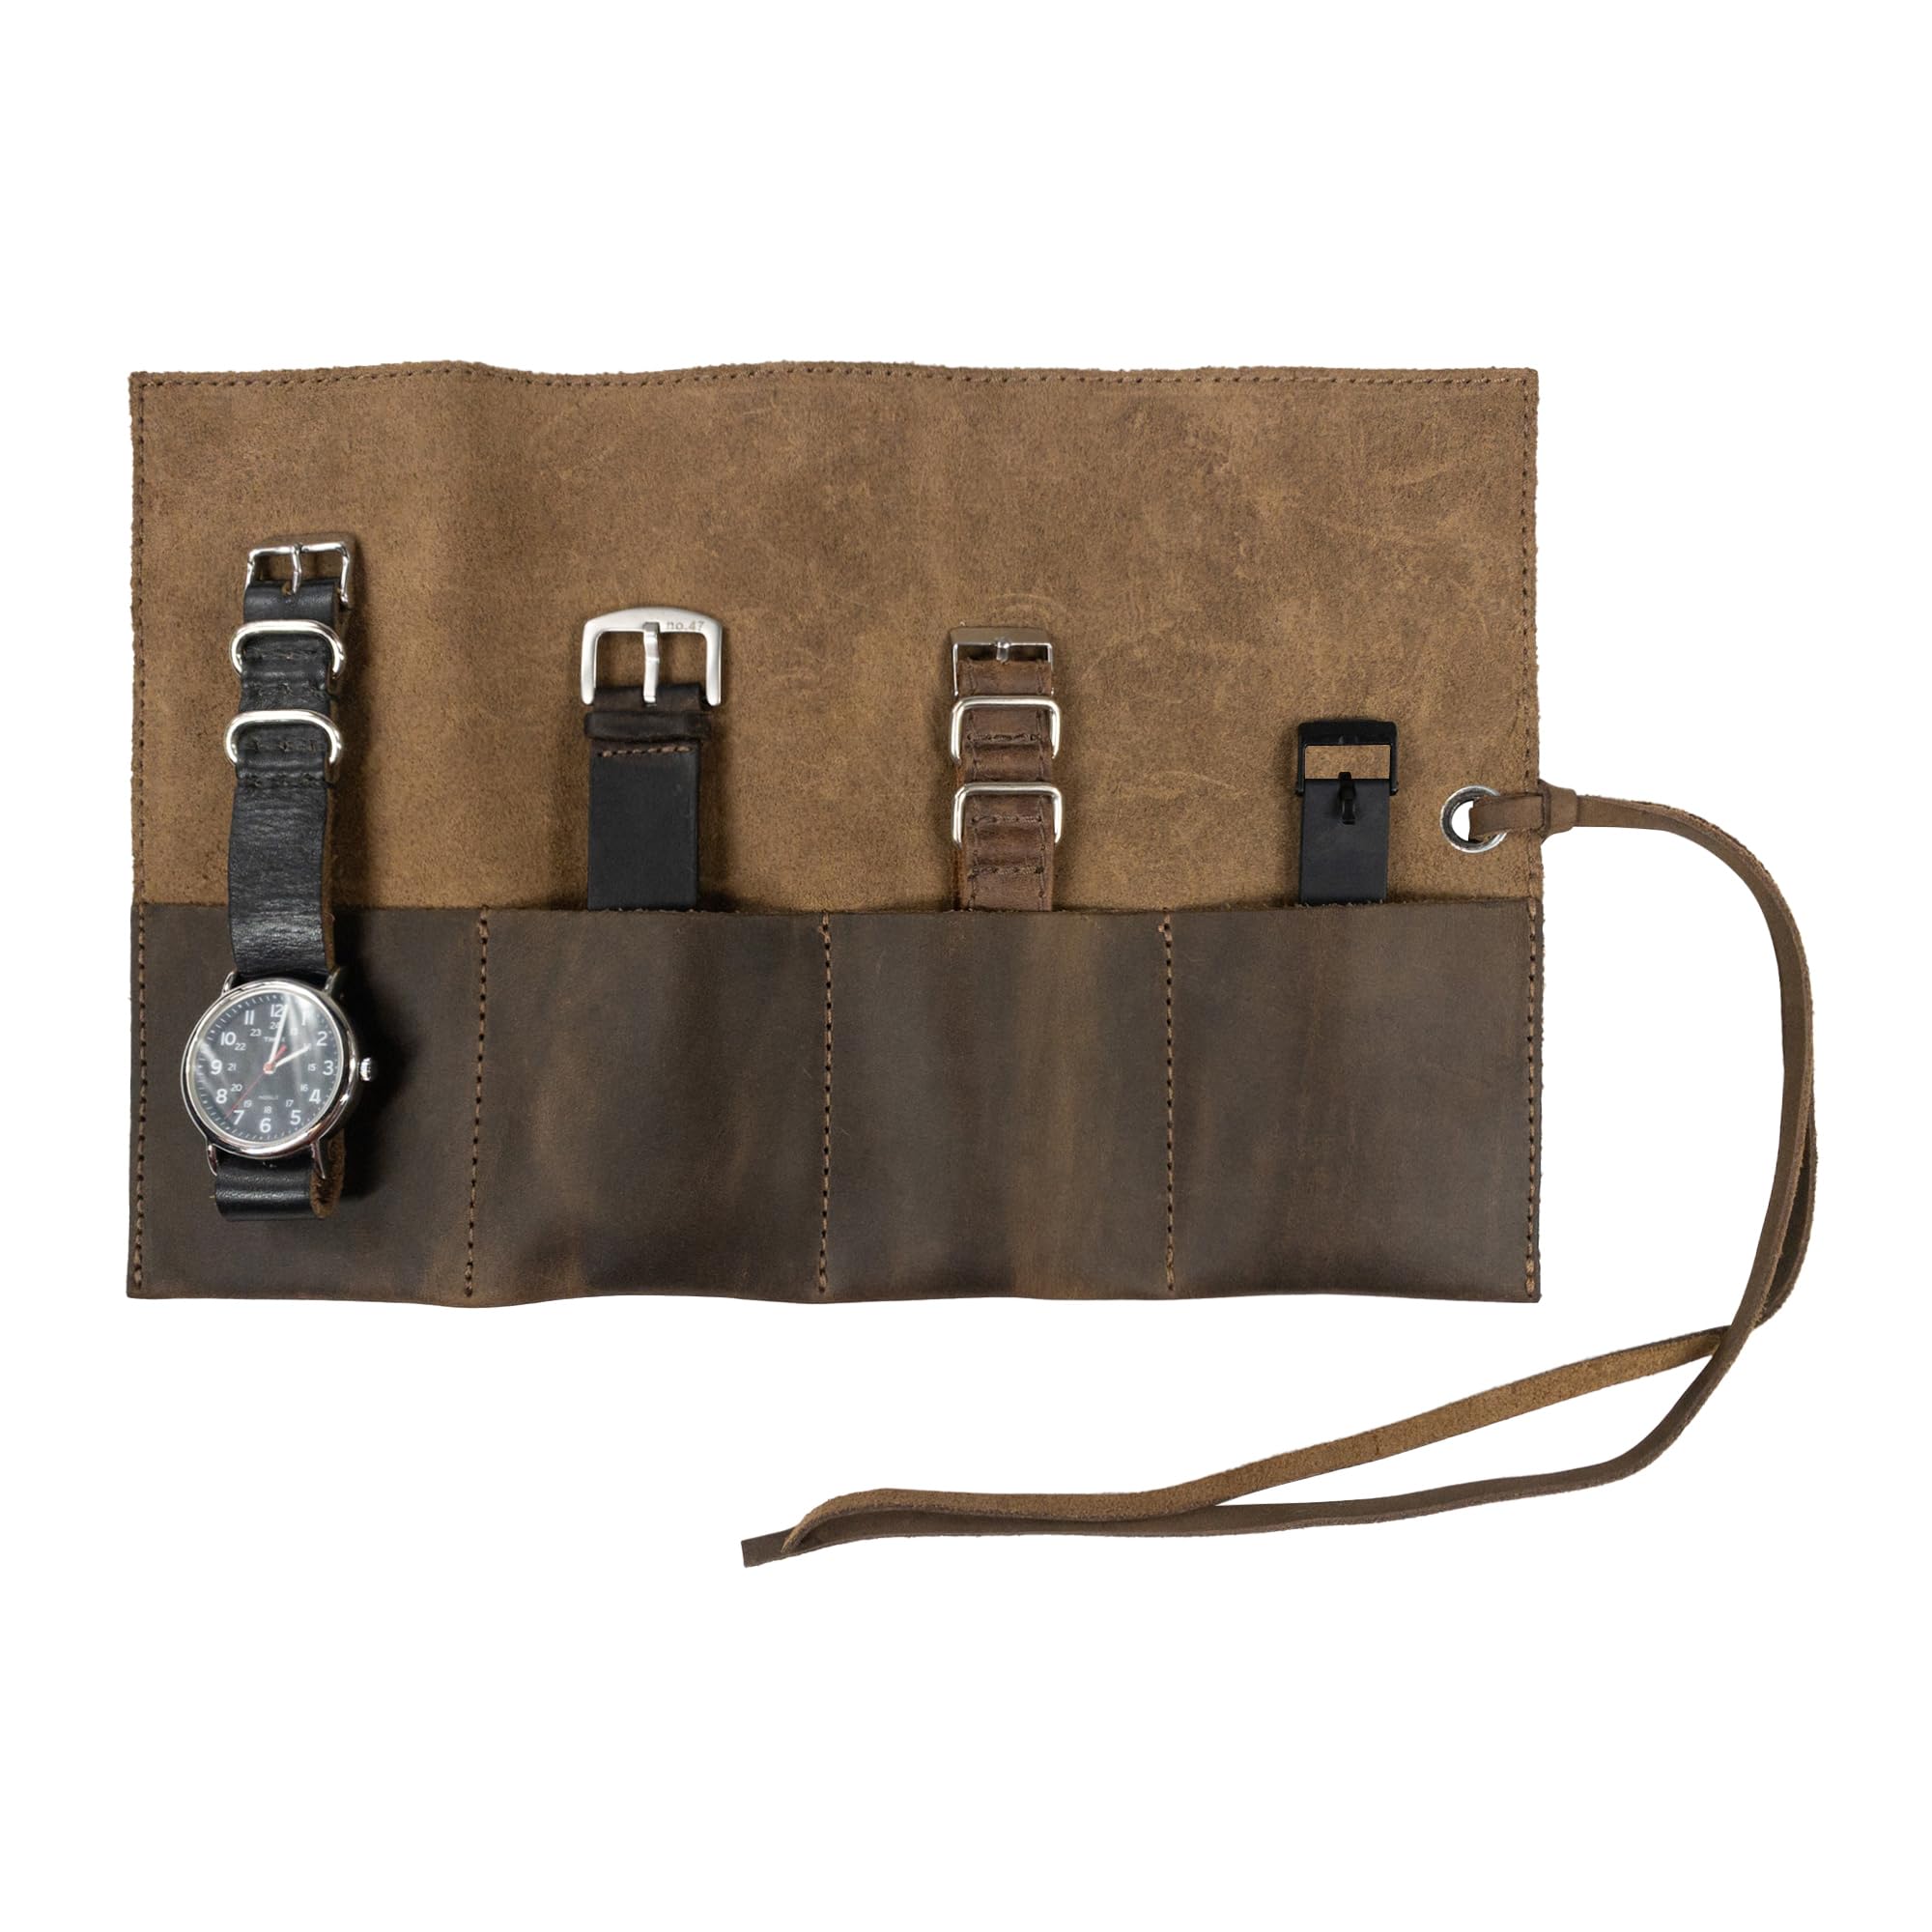 Hide & Drink, Leather Watch Roll Organizer Handmade from Full Grain Leather, Holds Up to 4 Watches, Easy Carry On Watchlover Storage (Bourbon Brown)